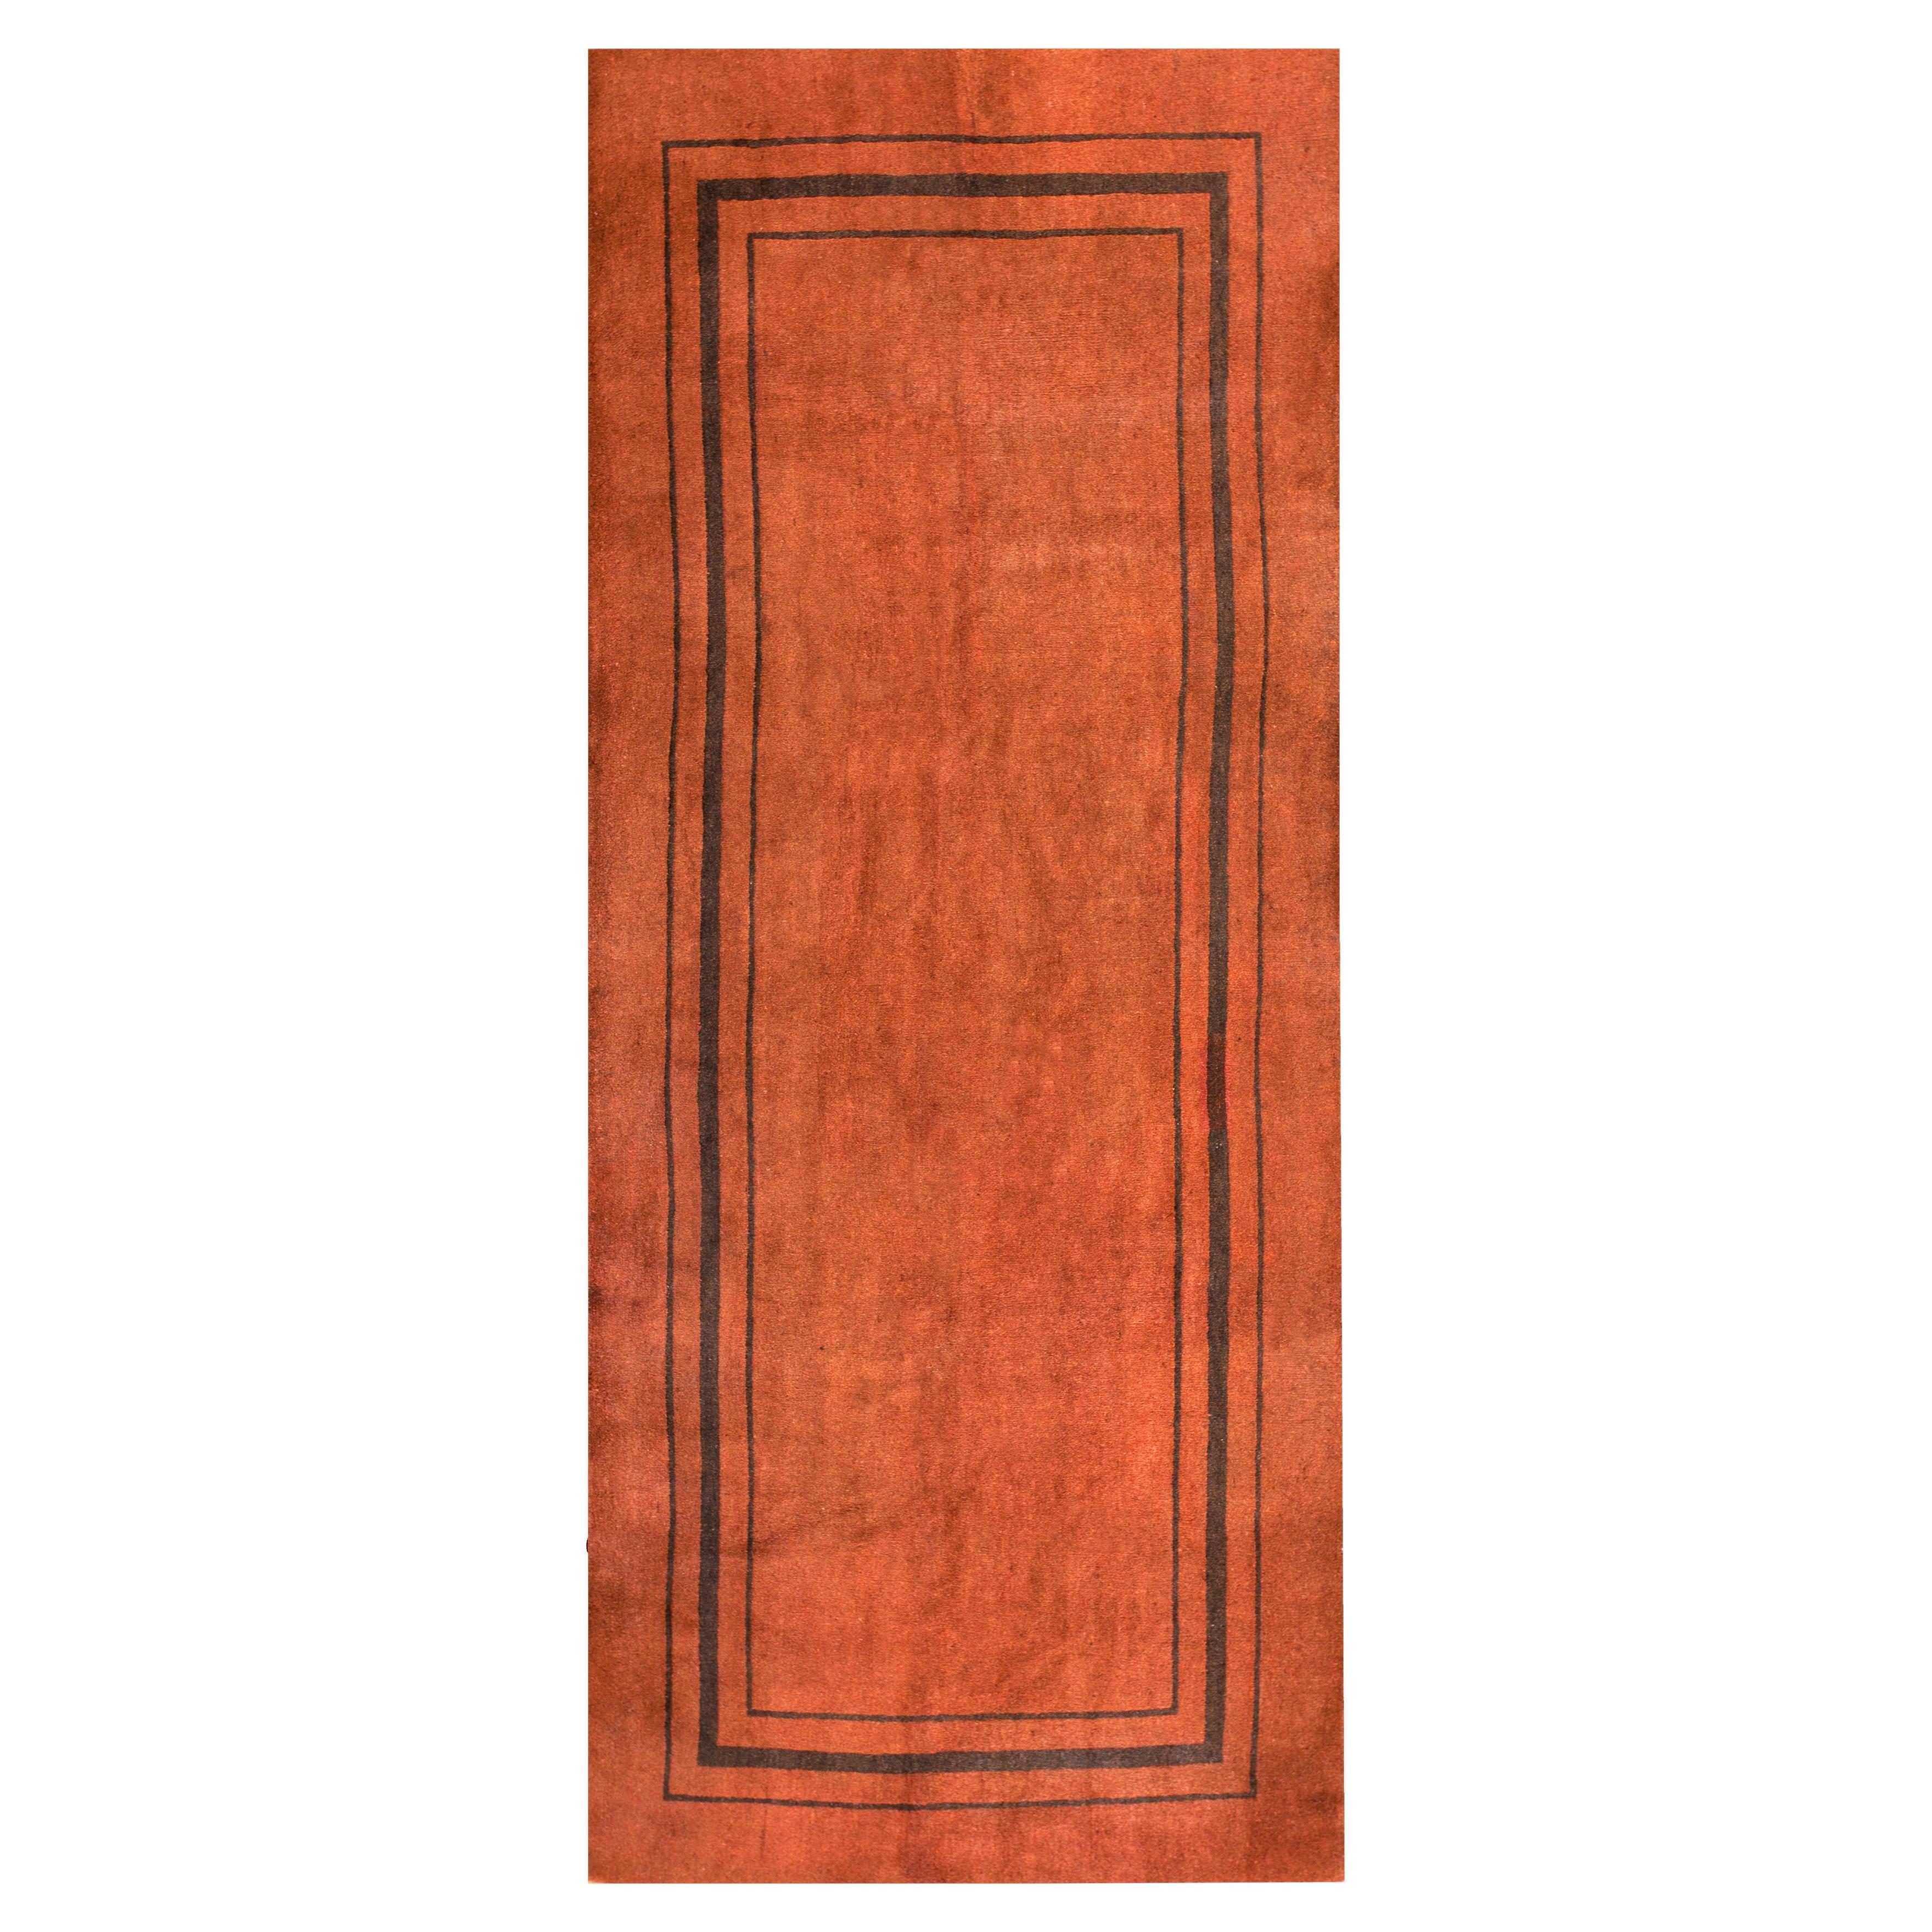 Early 20th Century Chinese Yulin Runner Carpet ( 3'9" x 8'9" - 114 x 267 ) For Sale